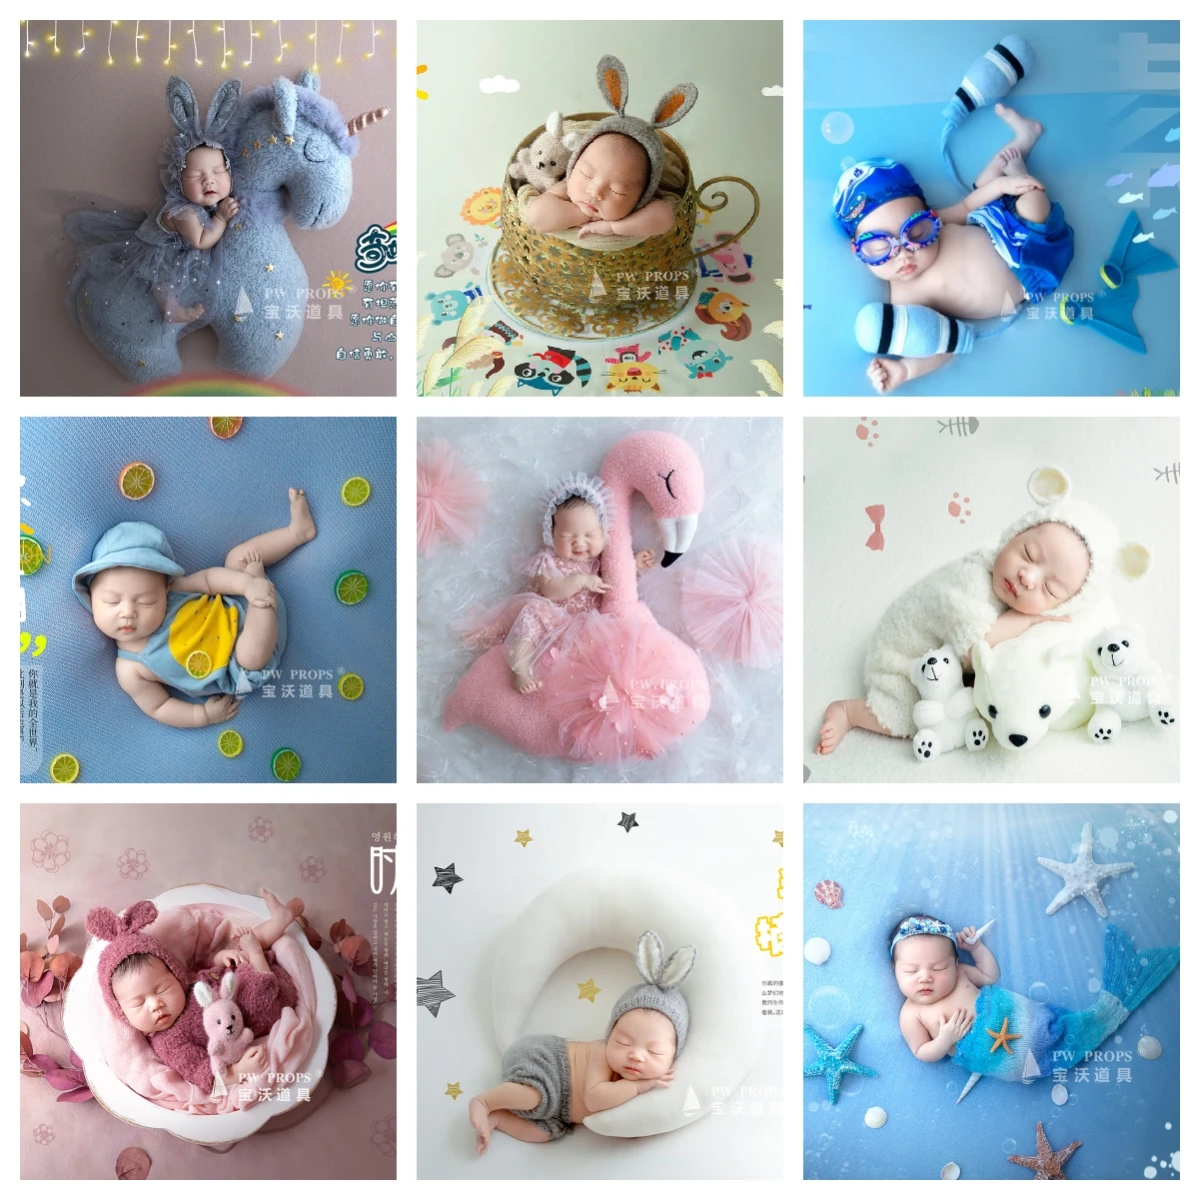 Newborn Baby Photography Props Floral Backdrop Posing Cute Animals Doll Outfits Theme Set Accessories Studio Shooting Photo Prop cartoon plush hat cute banana head cover photography prop photo prop